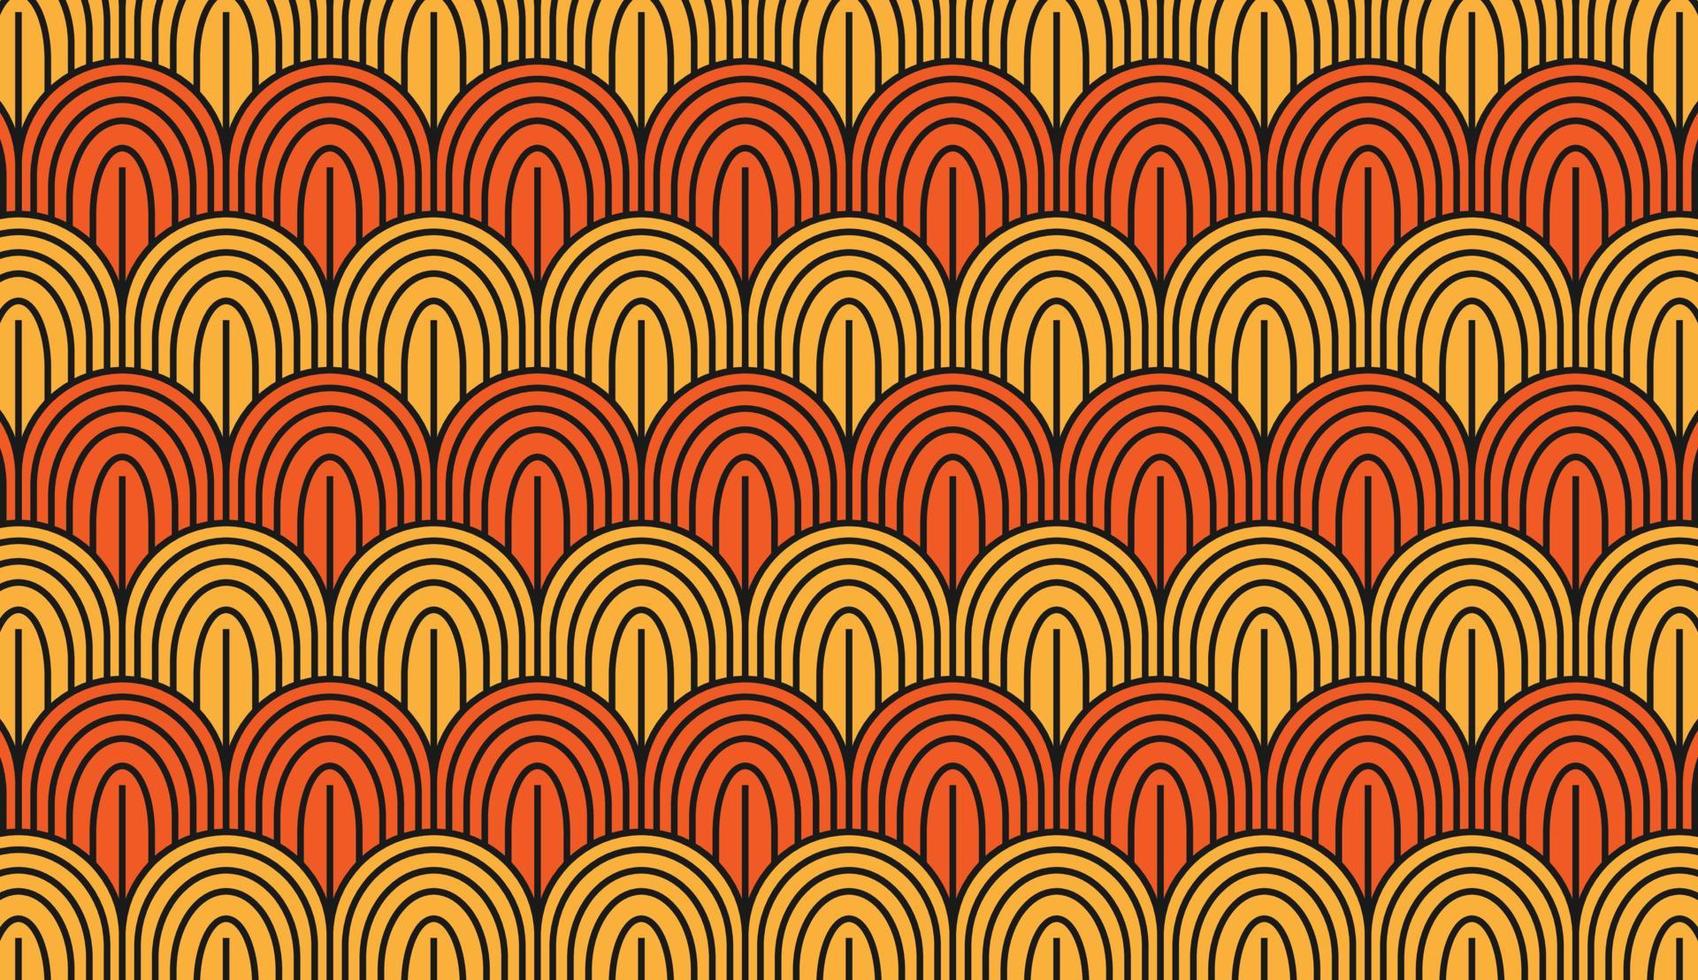 Seamless pattern. Fingerprint pattern. Modern style pattern design. Suitable for fabric pattern. Can be used for posters, brochures, postcards, and other printing needs. Vector illustration